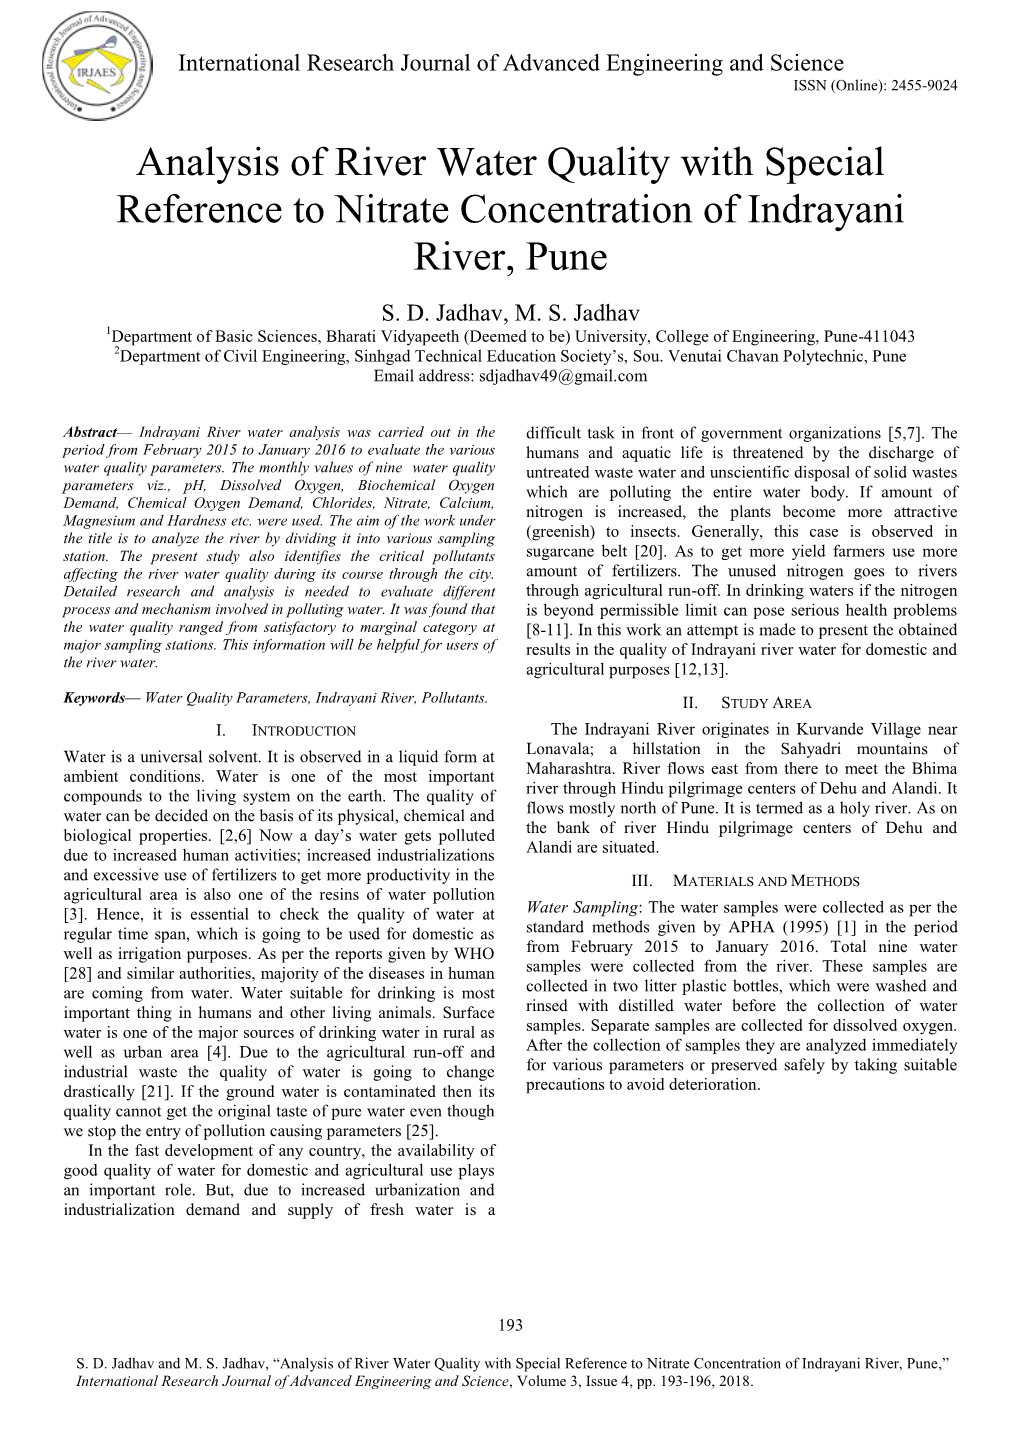 Analysis of River Water Quality with Special Reference to Nitrate Concentration of Indrayani River, Pune